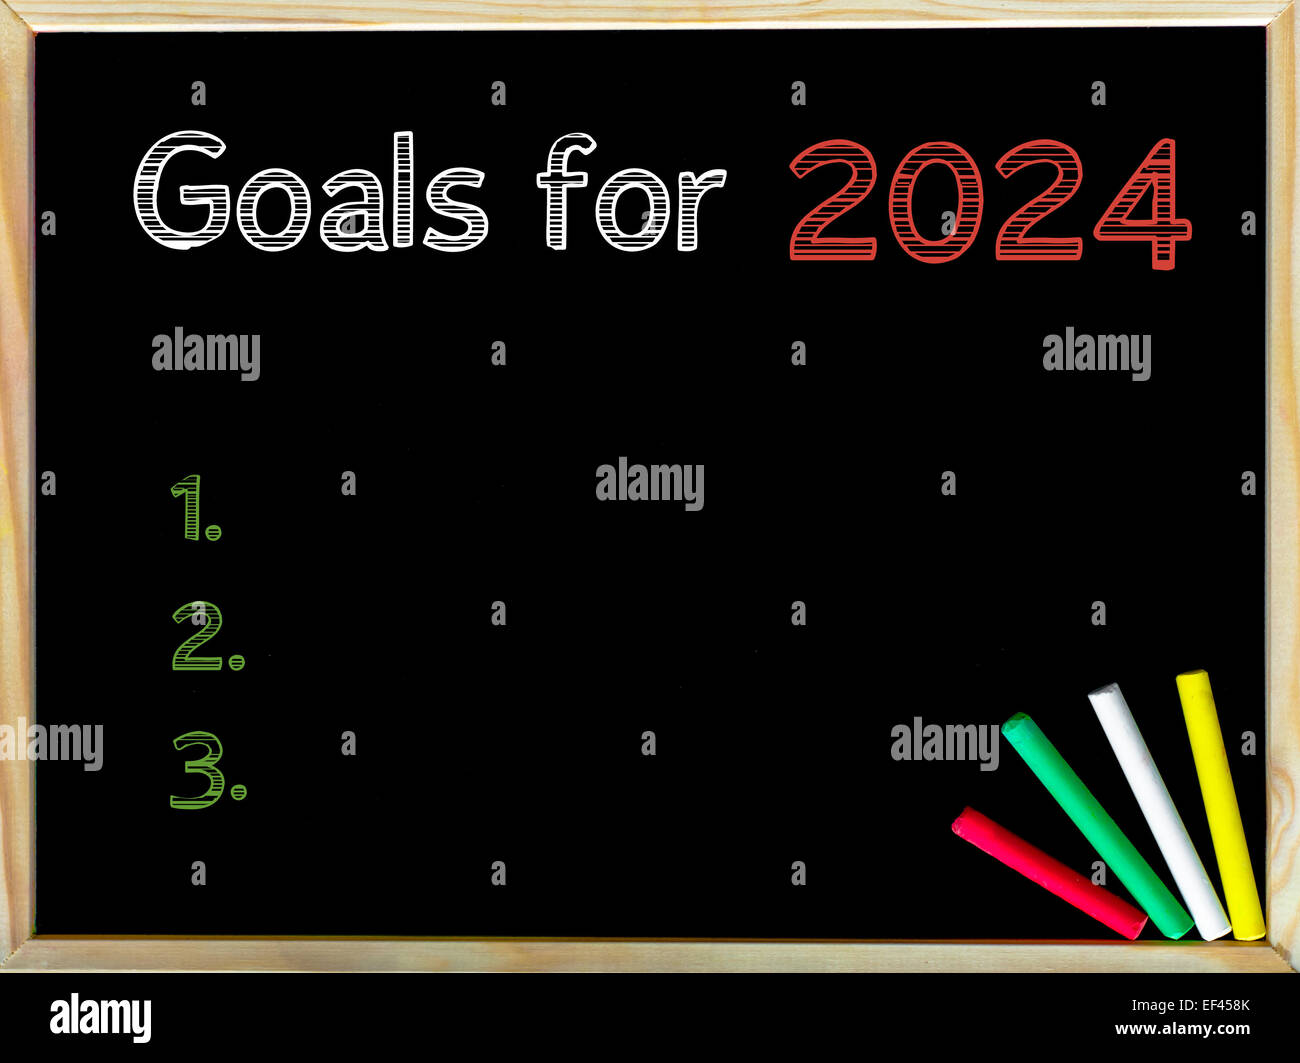 goals-for-2024-vintage-chalk-text-on-blackboard-colored-chalk-in-the